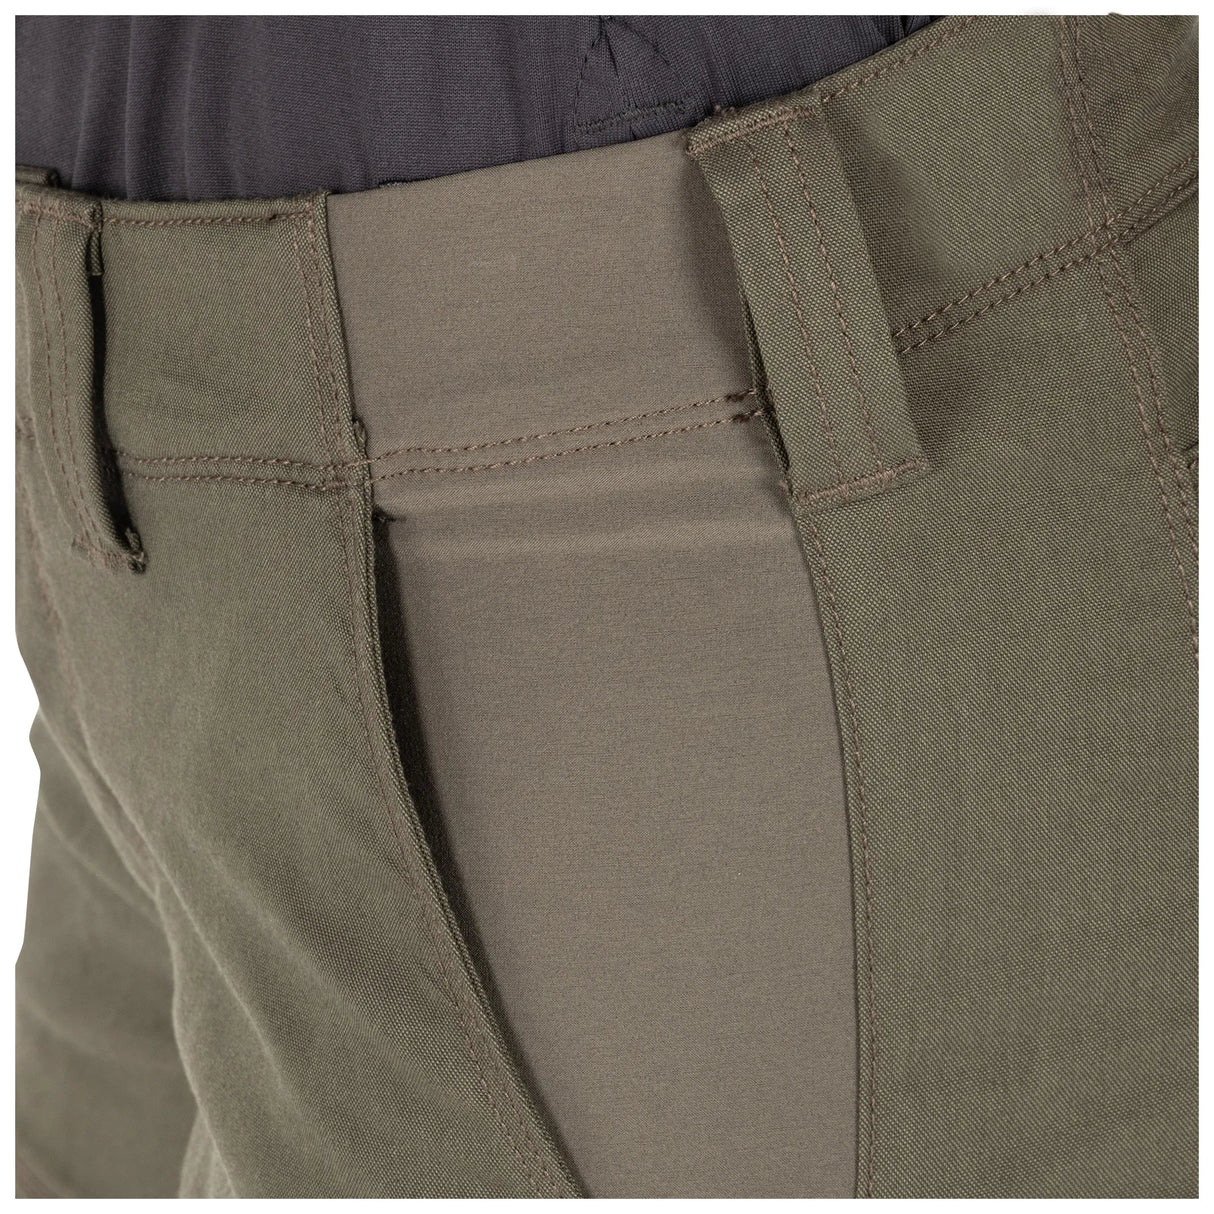 Low-Profile Cargo Pant: Zipper closures and internal storage keep items secure.